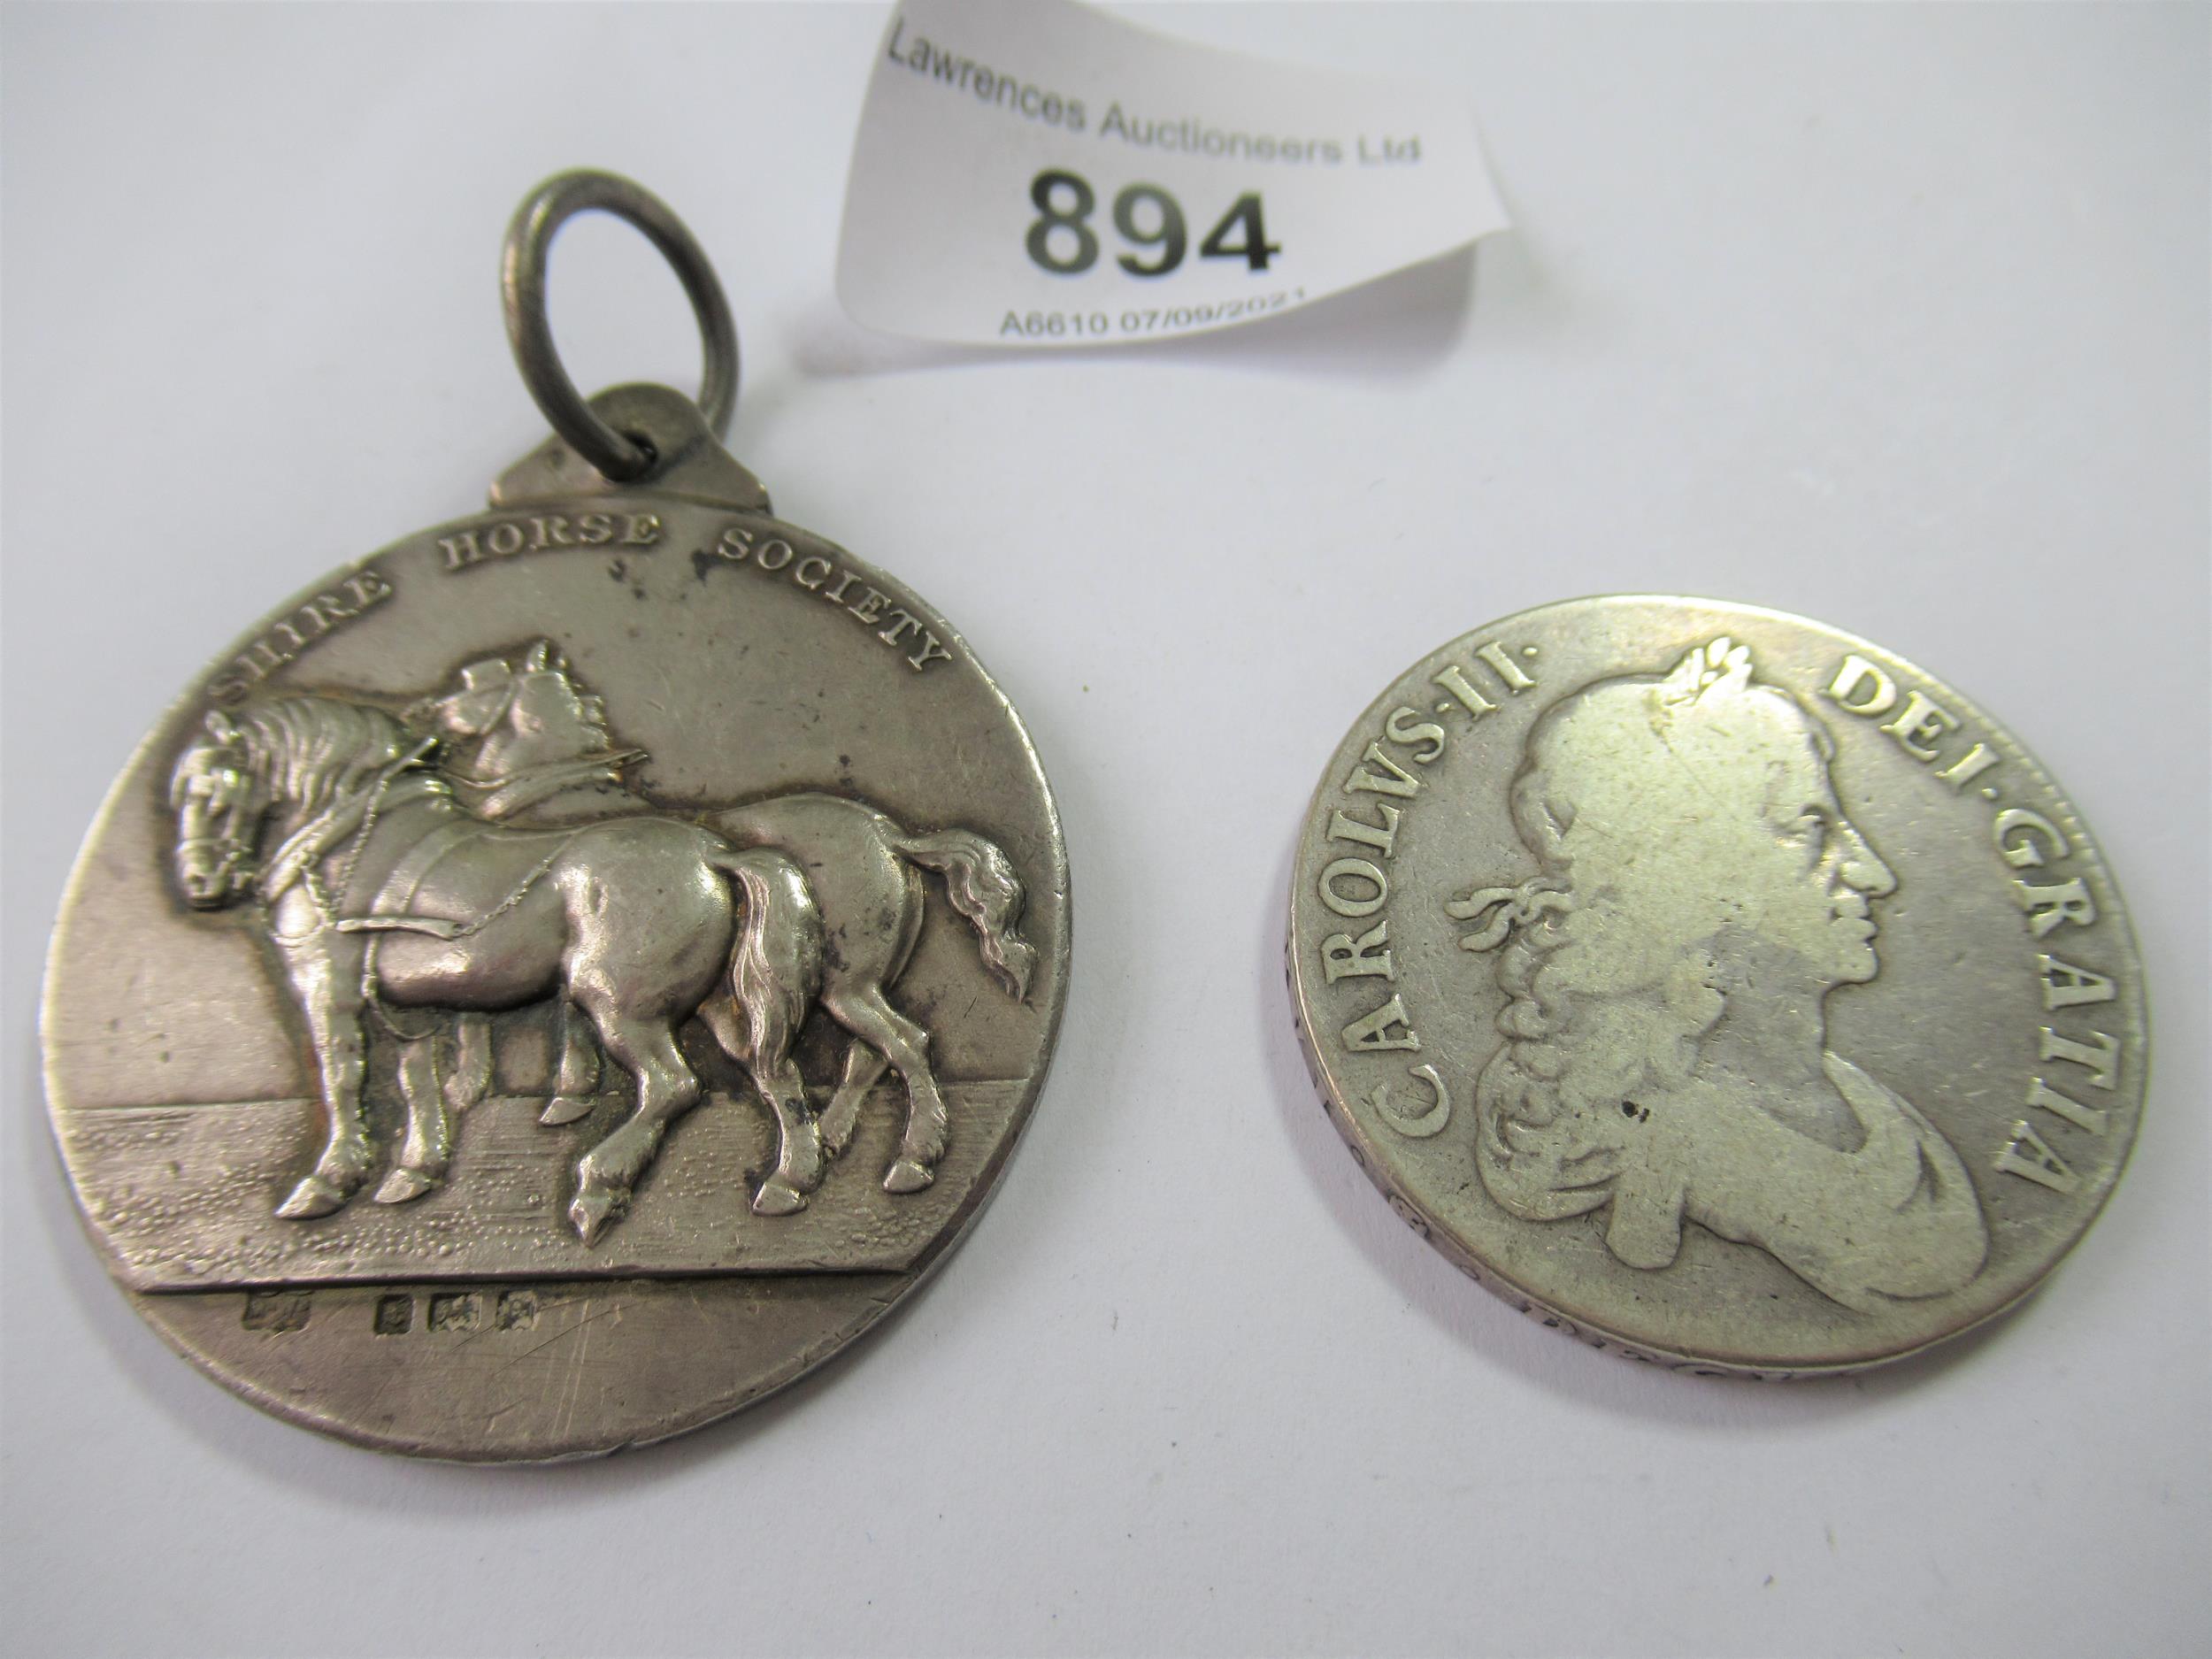 Charles II silver crown, 1664 together with a silver Shire Horse Society medallion